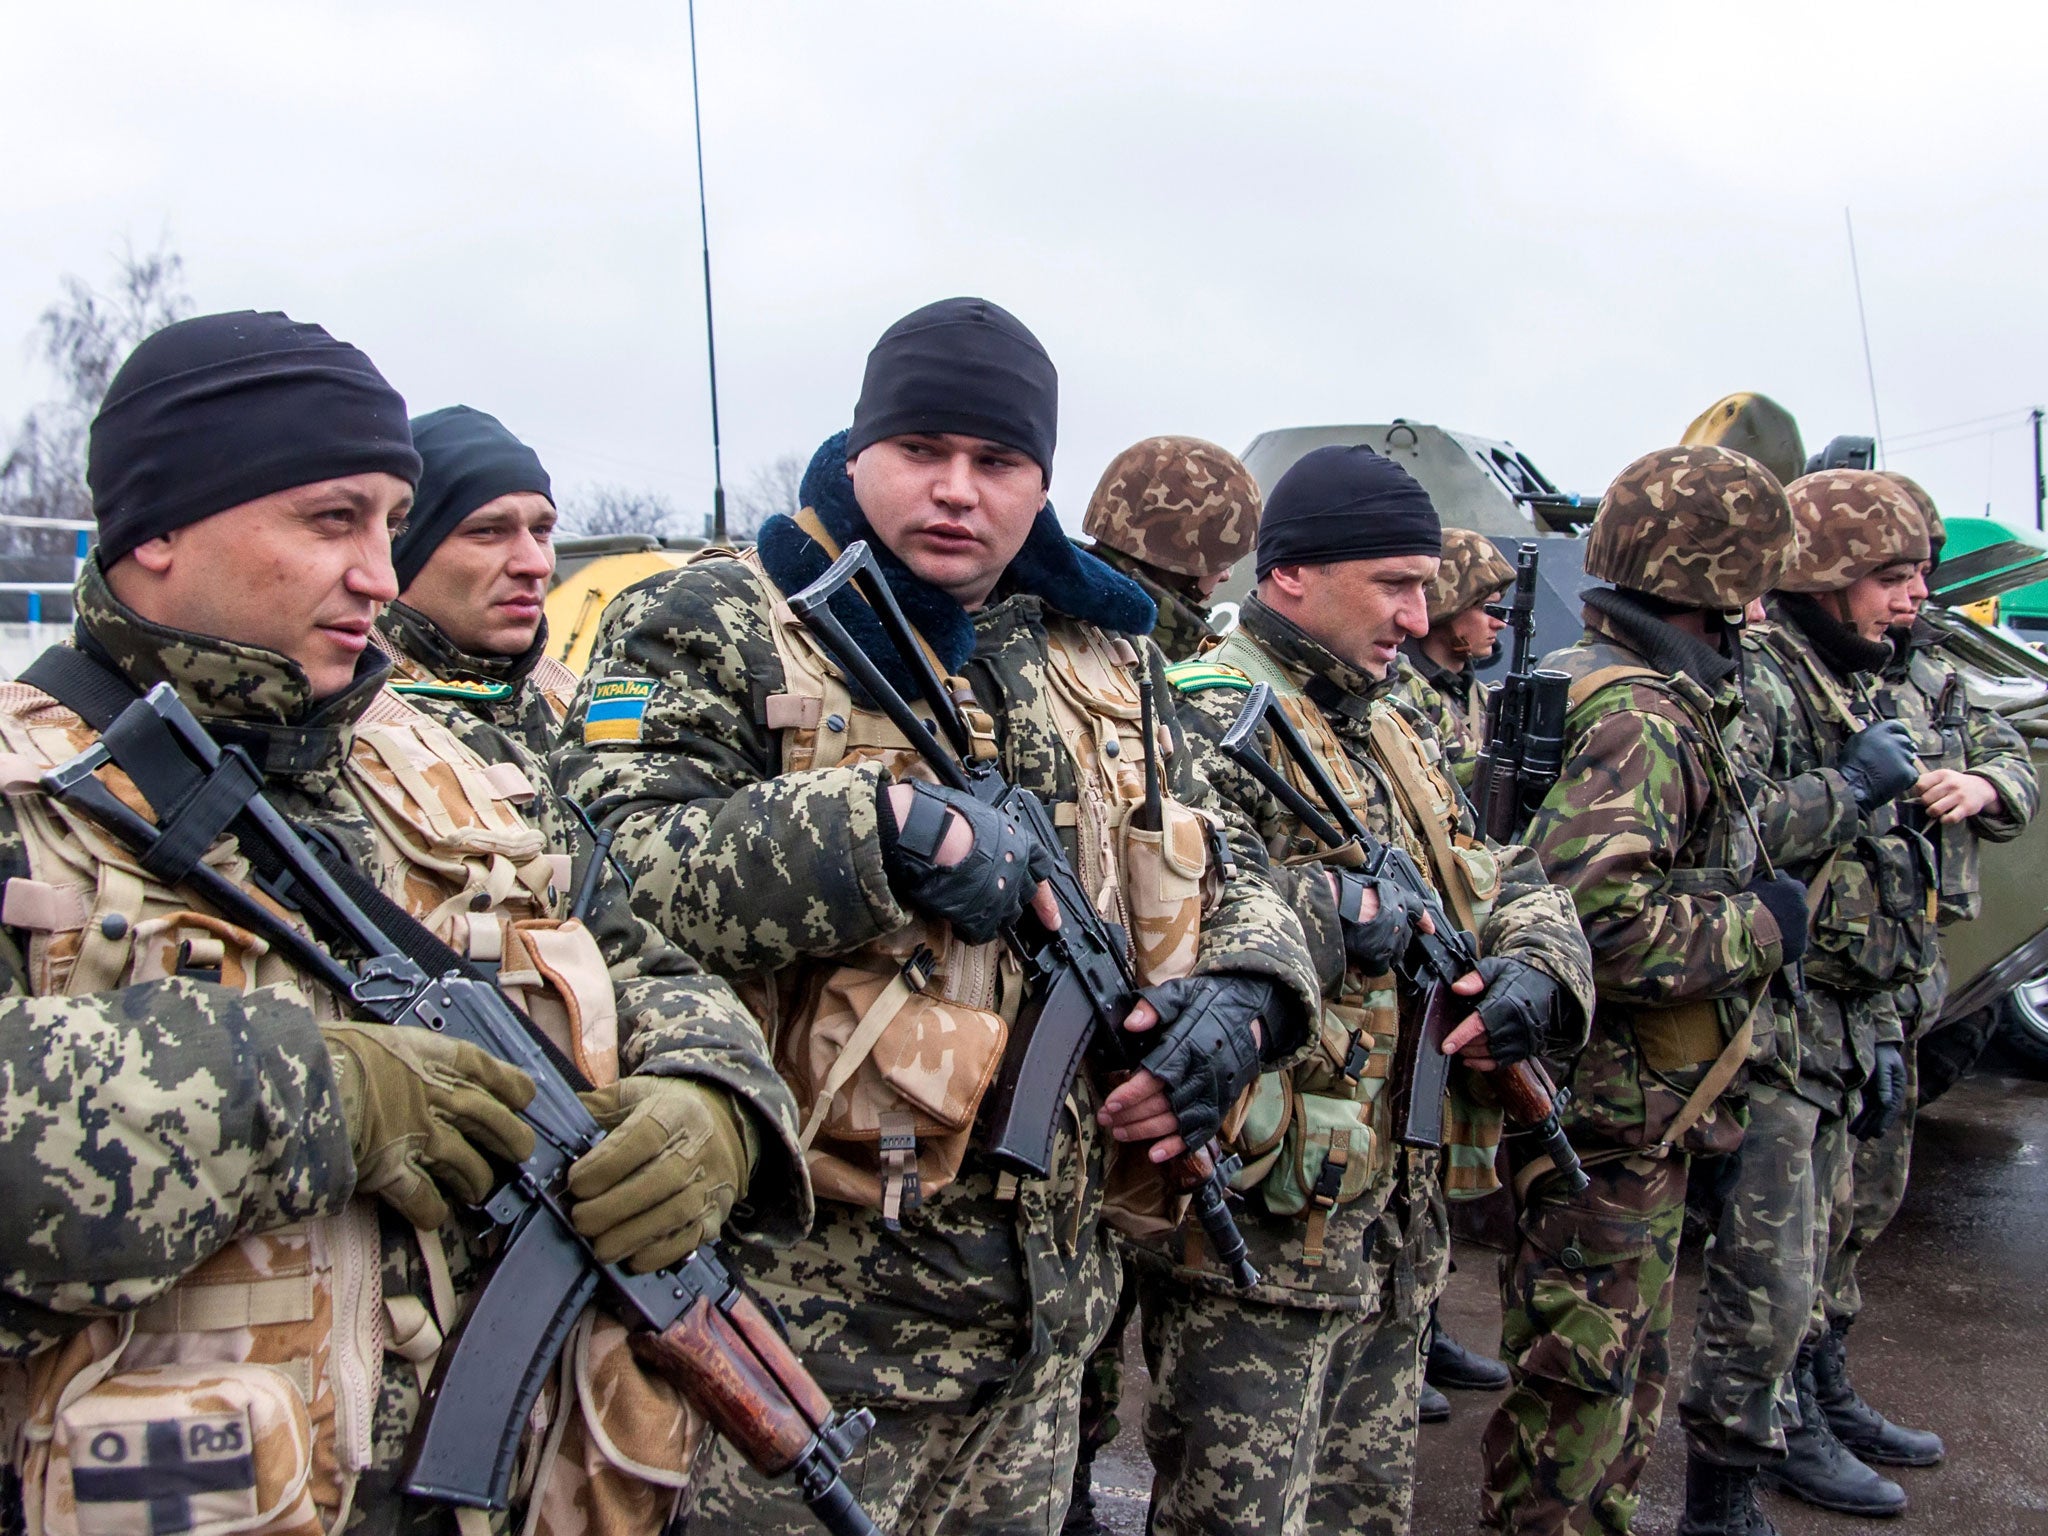 A unit of Ukrainian border guards line up before starting their patrol on the Russian border, in the village of Veseloye, in the Kharkiv region, on 4 April.